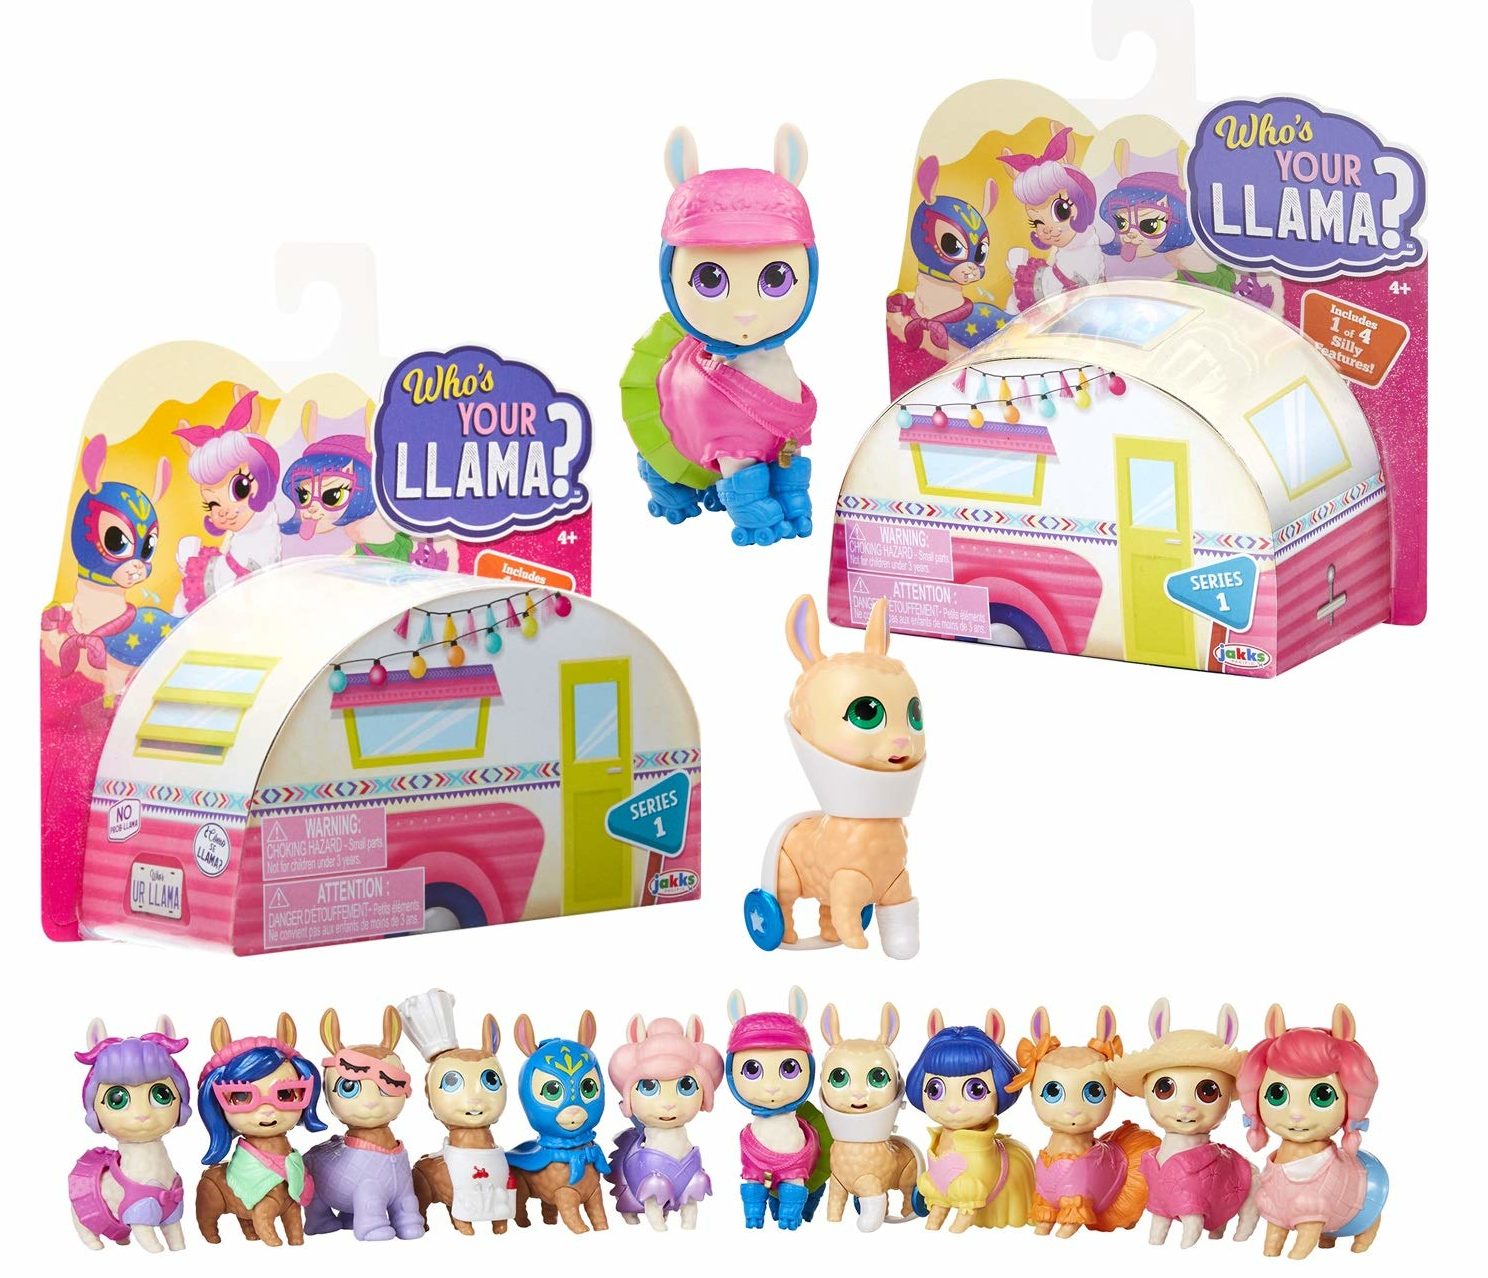 Best Llama Gifts 2022: Who's Your Llama Surprise Toys